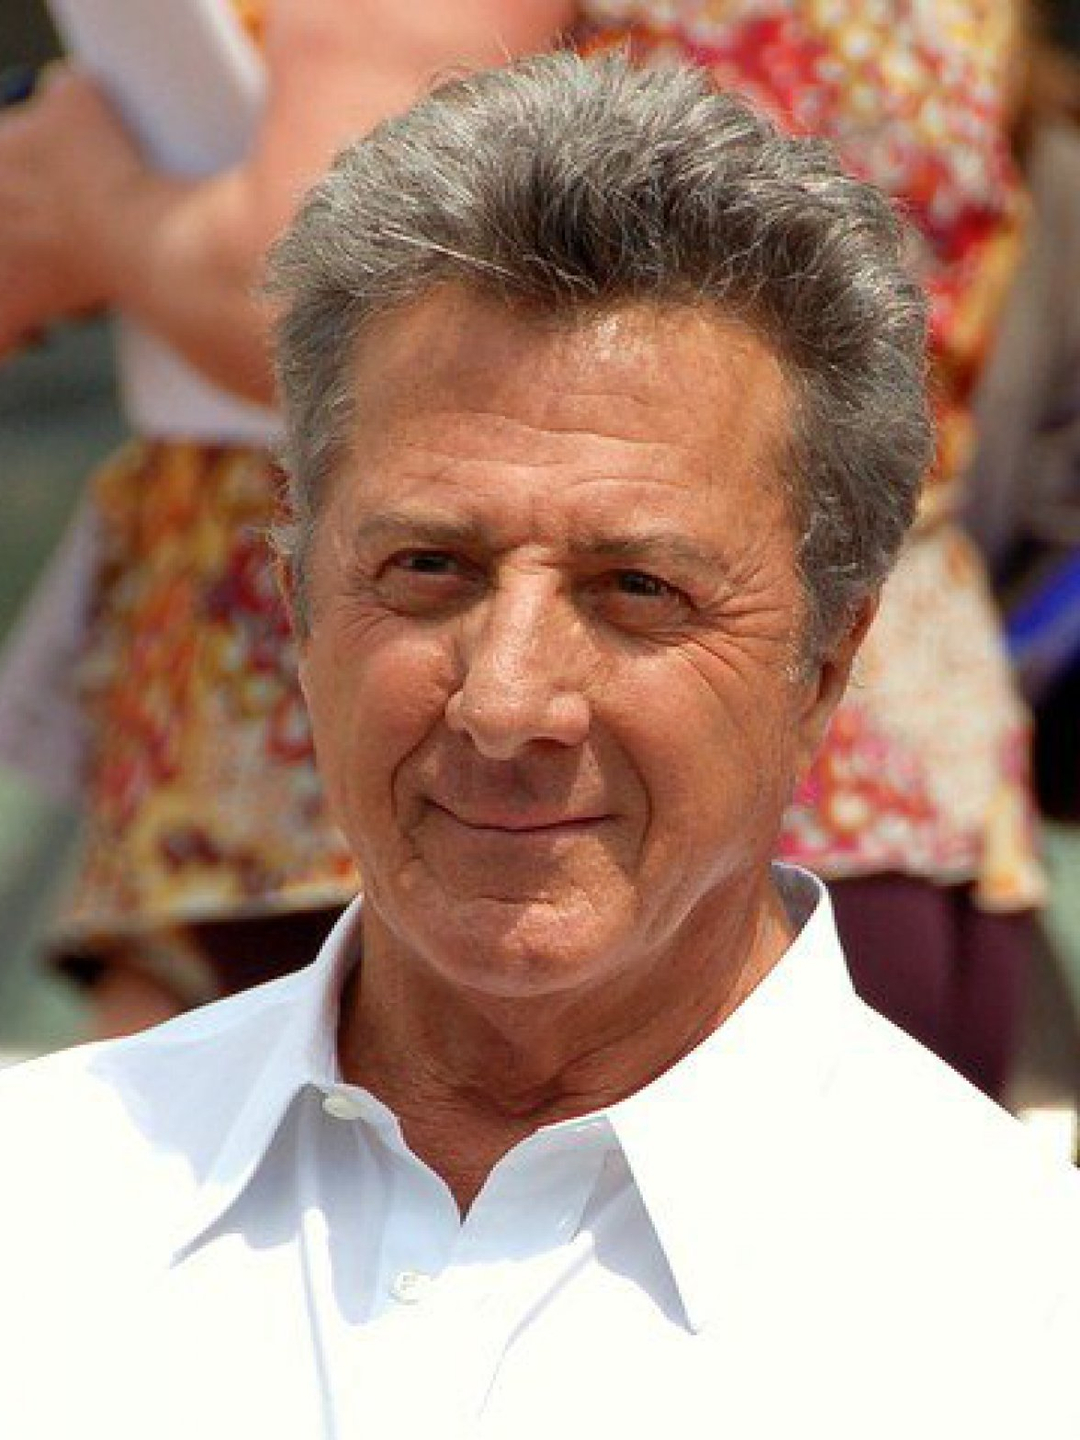 Dustin Hoffman who is his father